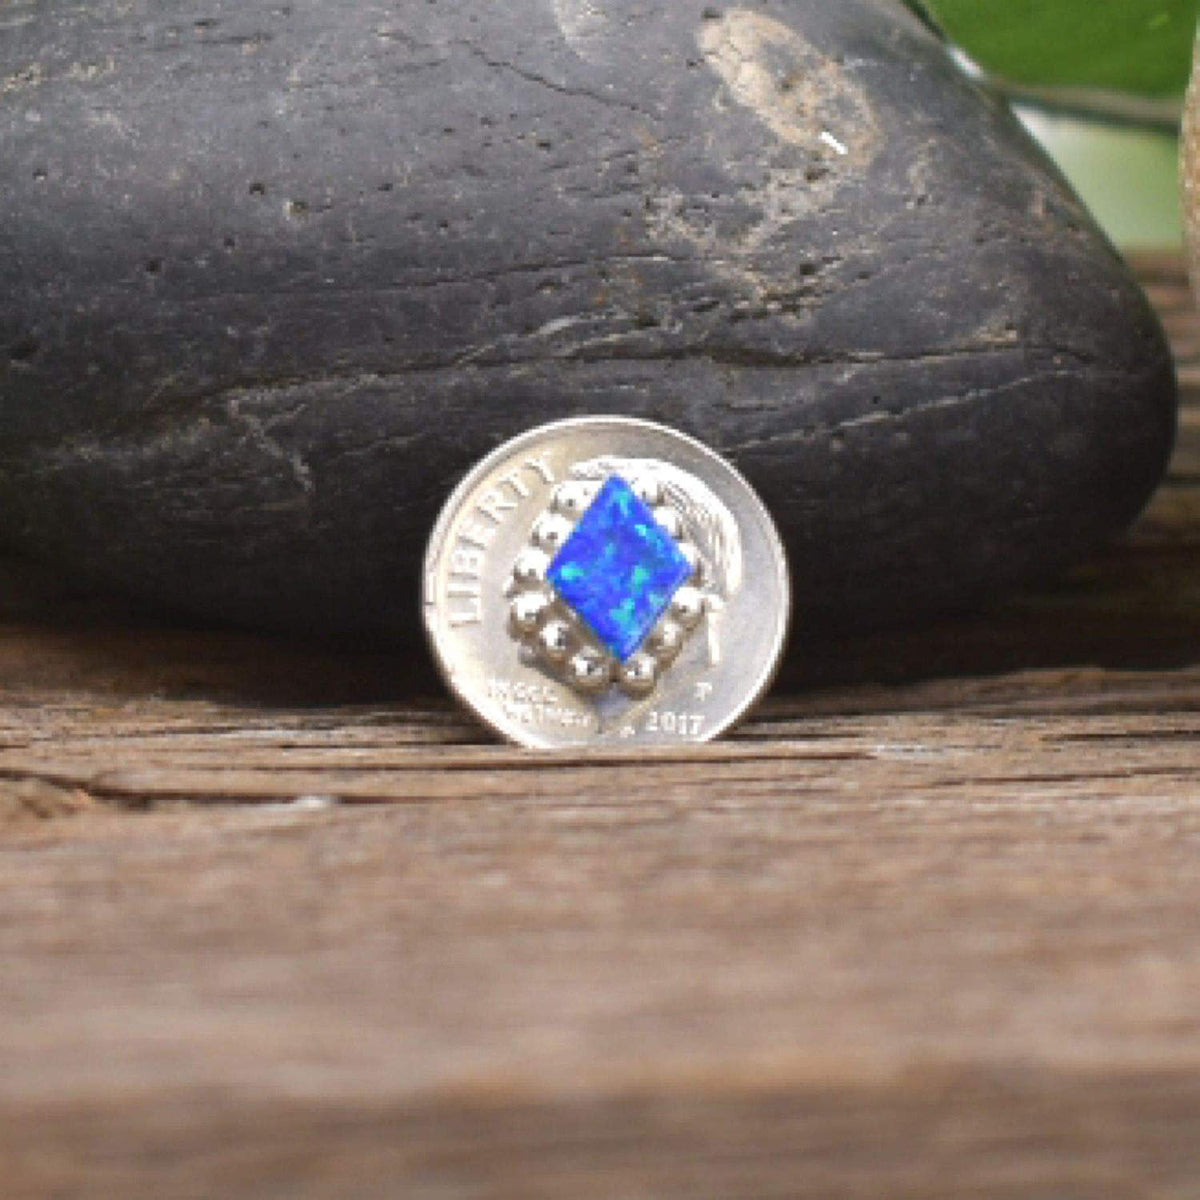 Desert Opal in 925 Sterling Silver, Diamond Concho Style, Authentic Native American USA Handmade, Dark Blue Synthetic Opal